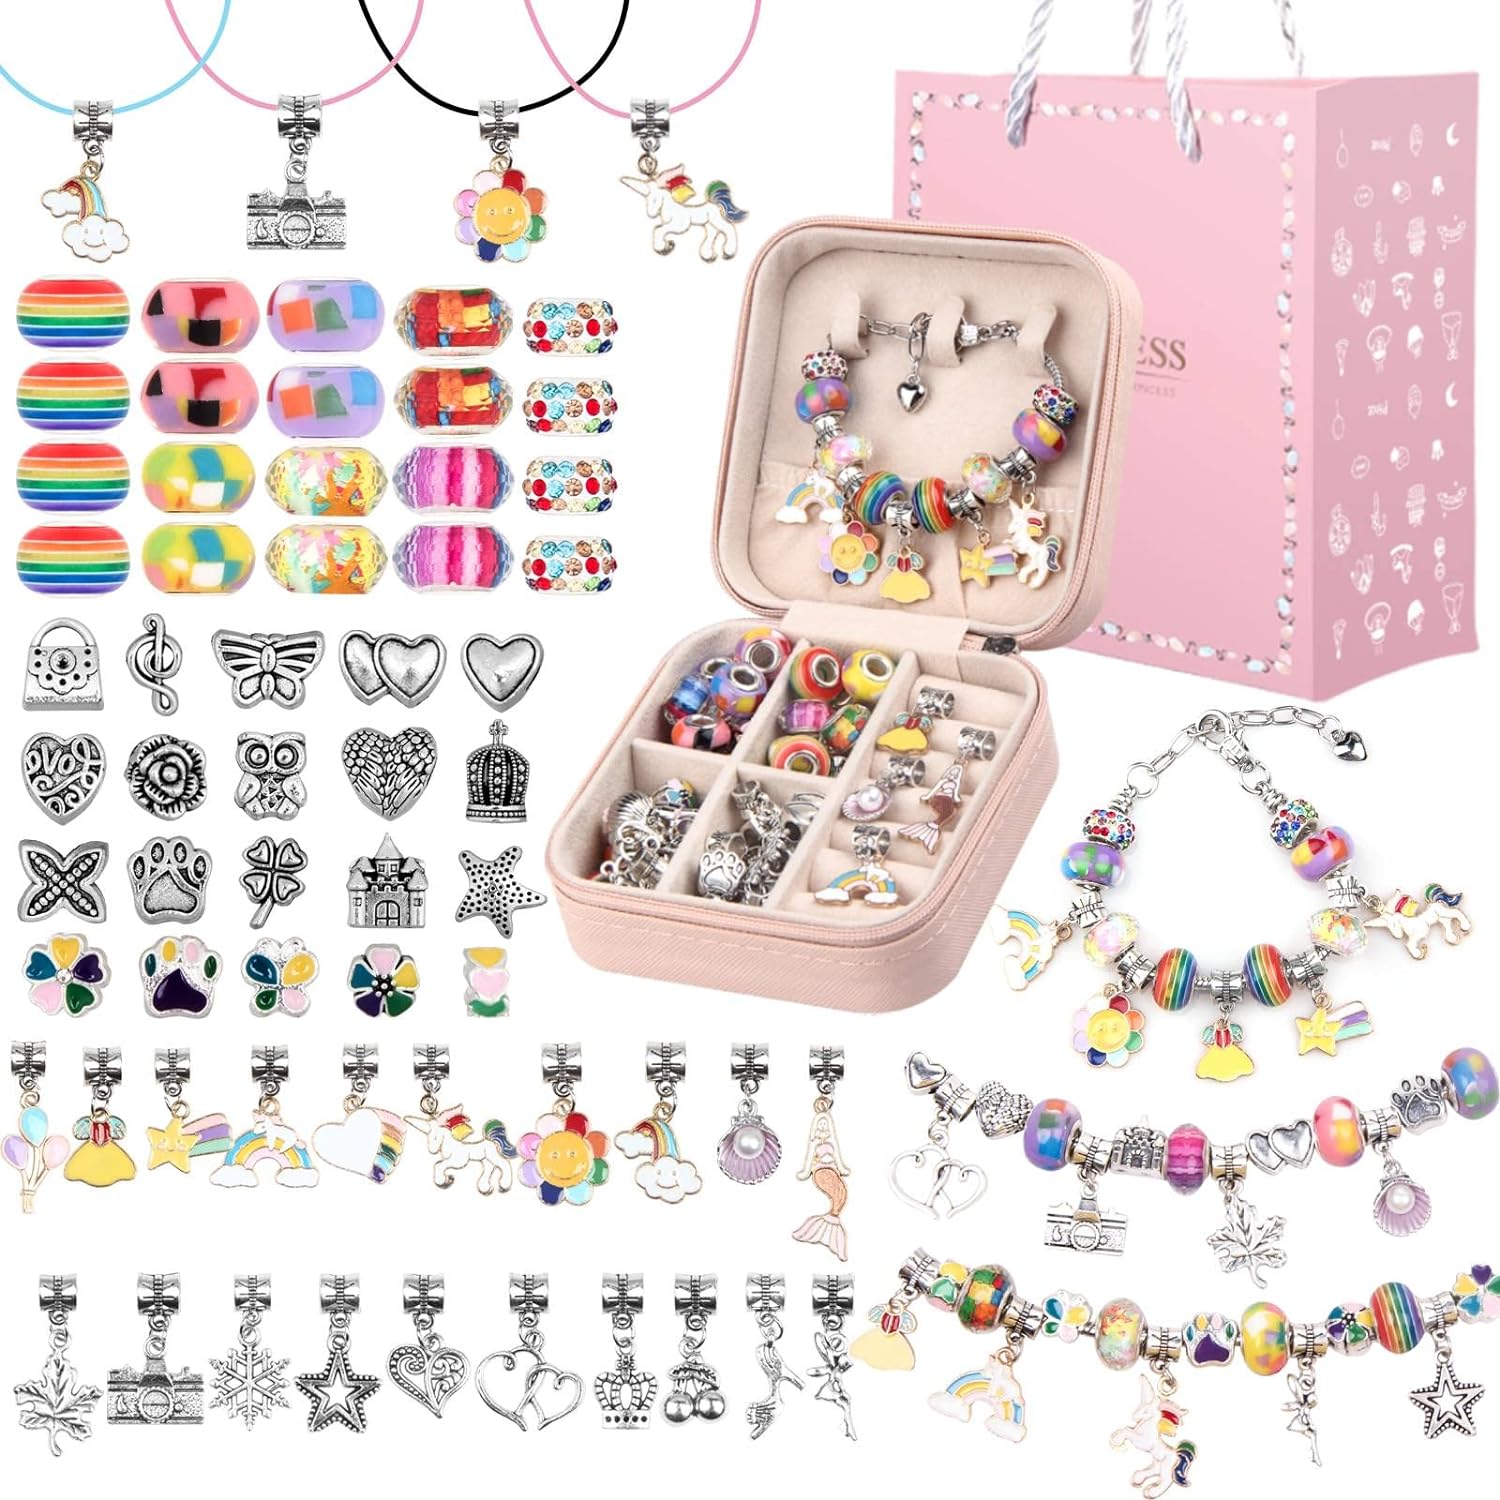 AIPRIDY Charm Bracelet Making Kit,DIY Craft for Girls, Unicorn Mermaid  Crafts Gifts Set for Arts and Crafts for Girls Teens Ages 6-12 (150 Pieces)